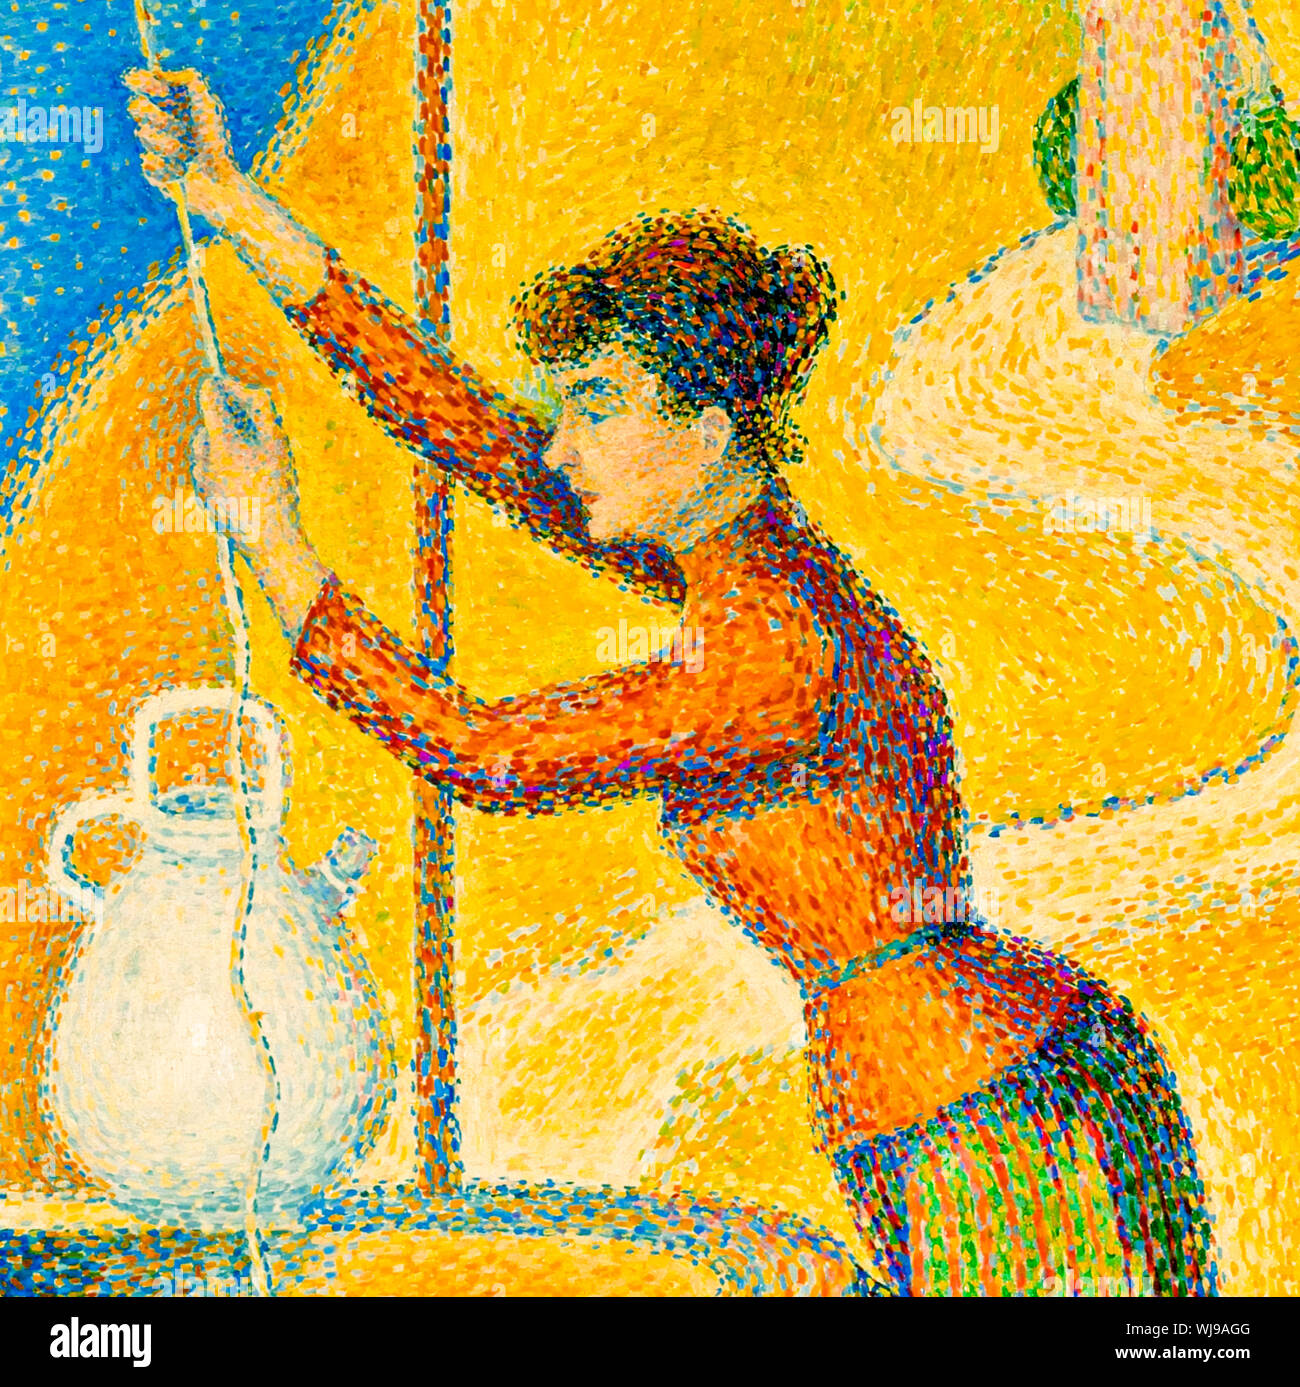 Pointillist technique: Paul Signac, Women at the Well, painting 1892 Stock Photo